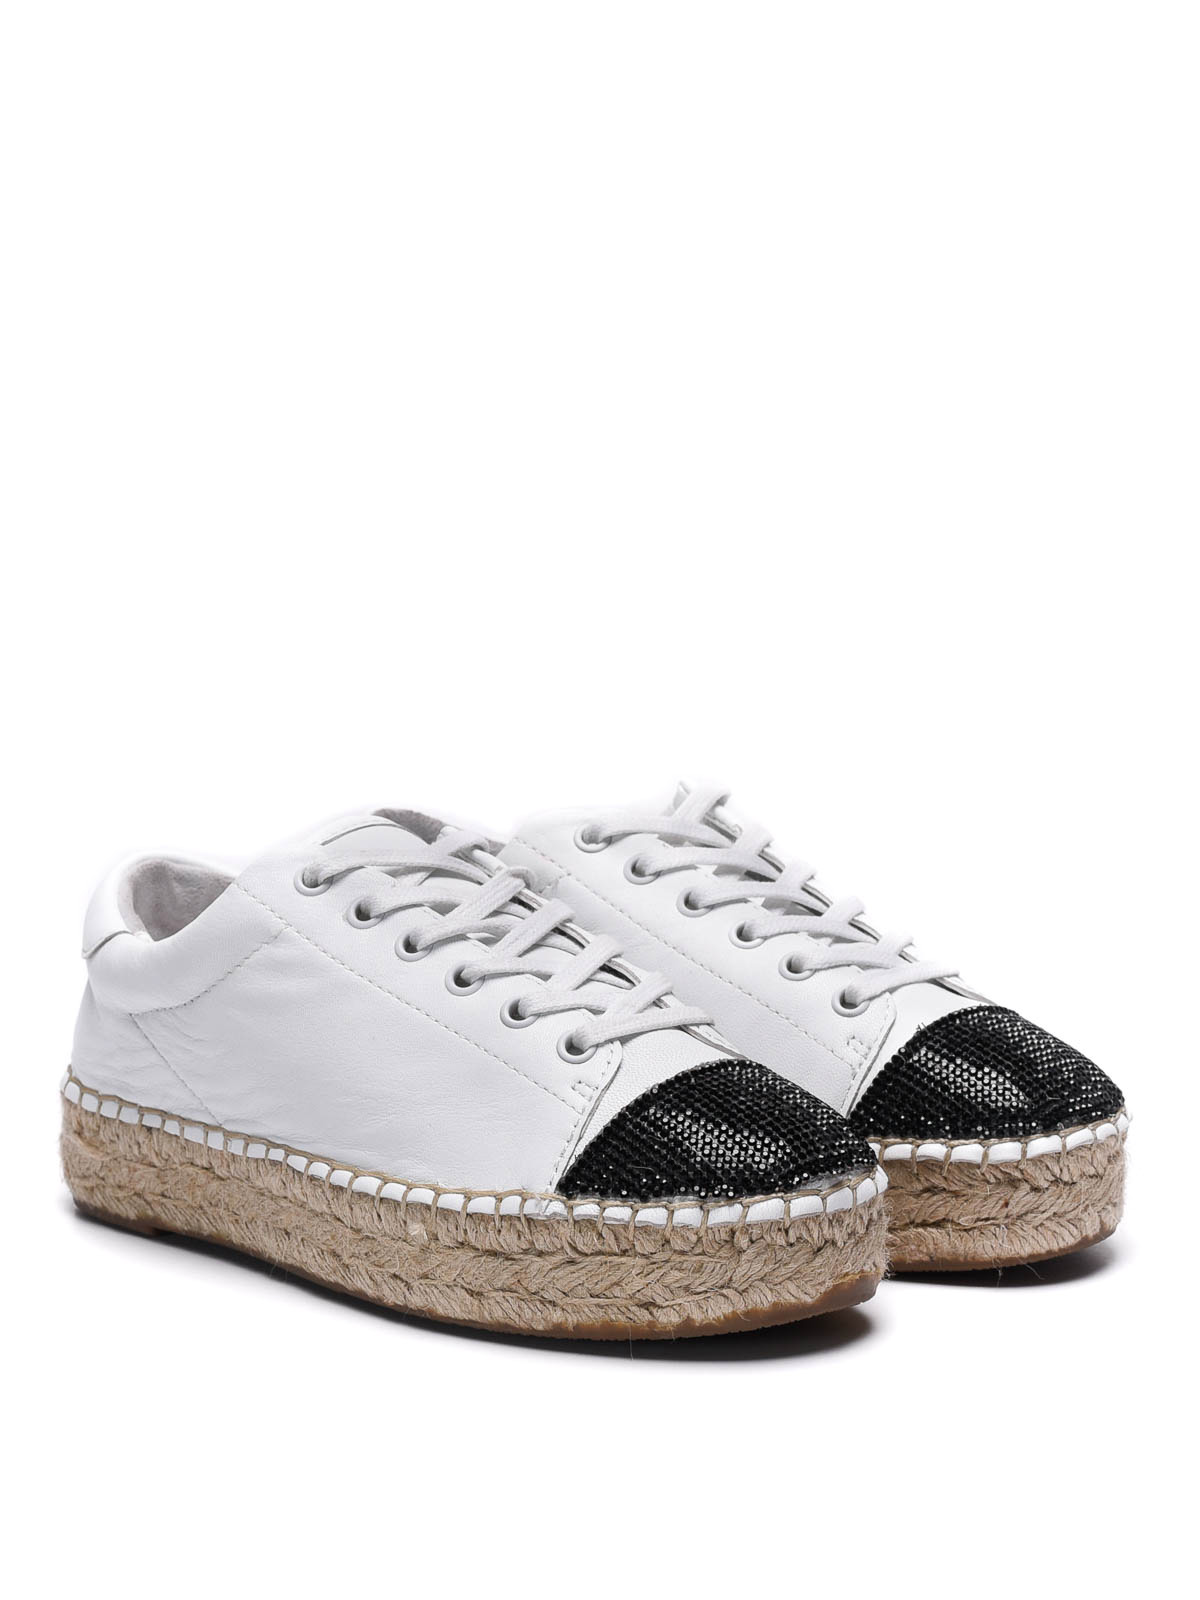 kendall and kylie espadrille sneakers